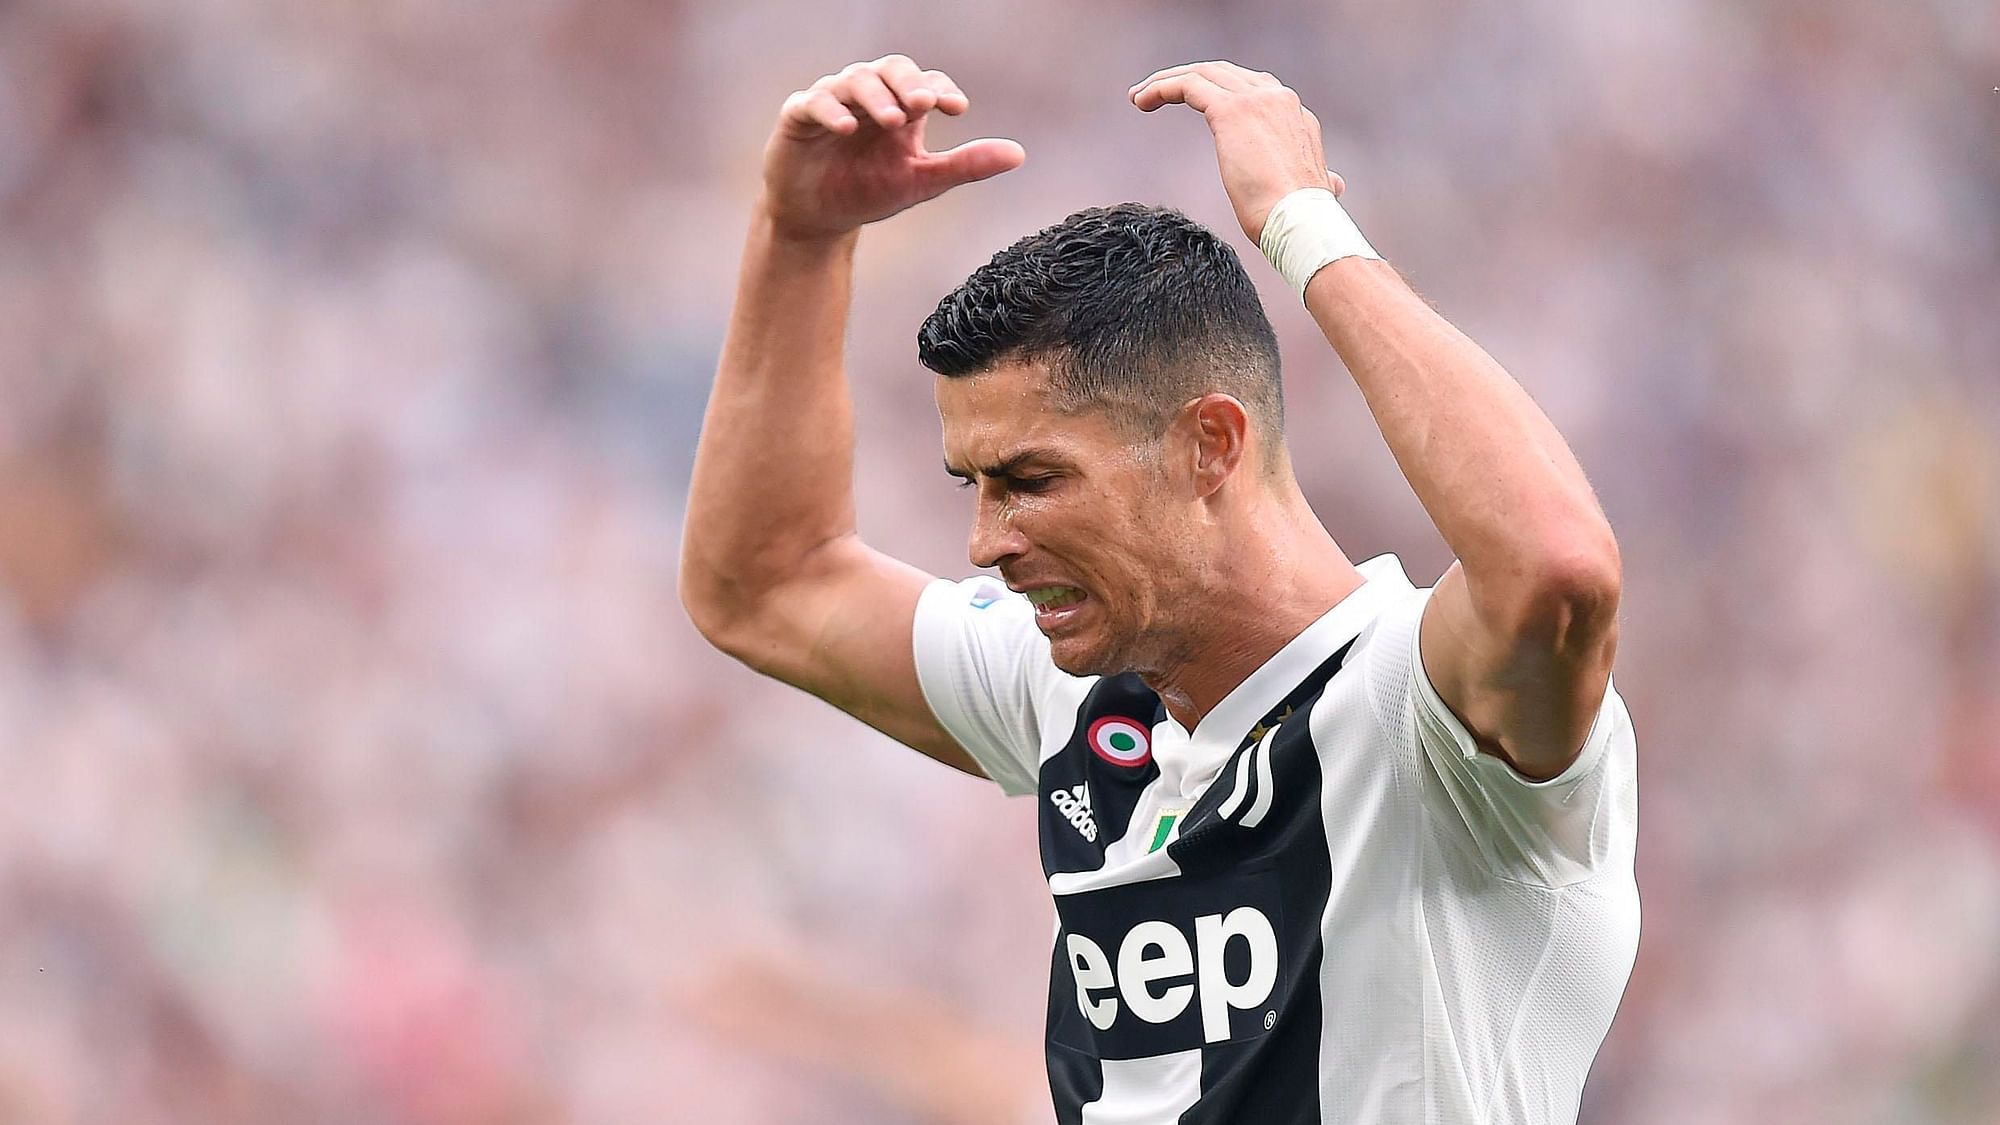 Ronaldo’s attorneys have acknowledged that the football star and Mayorga had consensual sex in June 2009, but they denied it was rape.